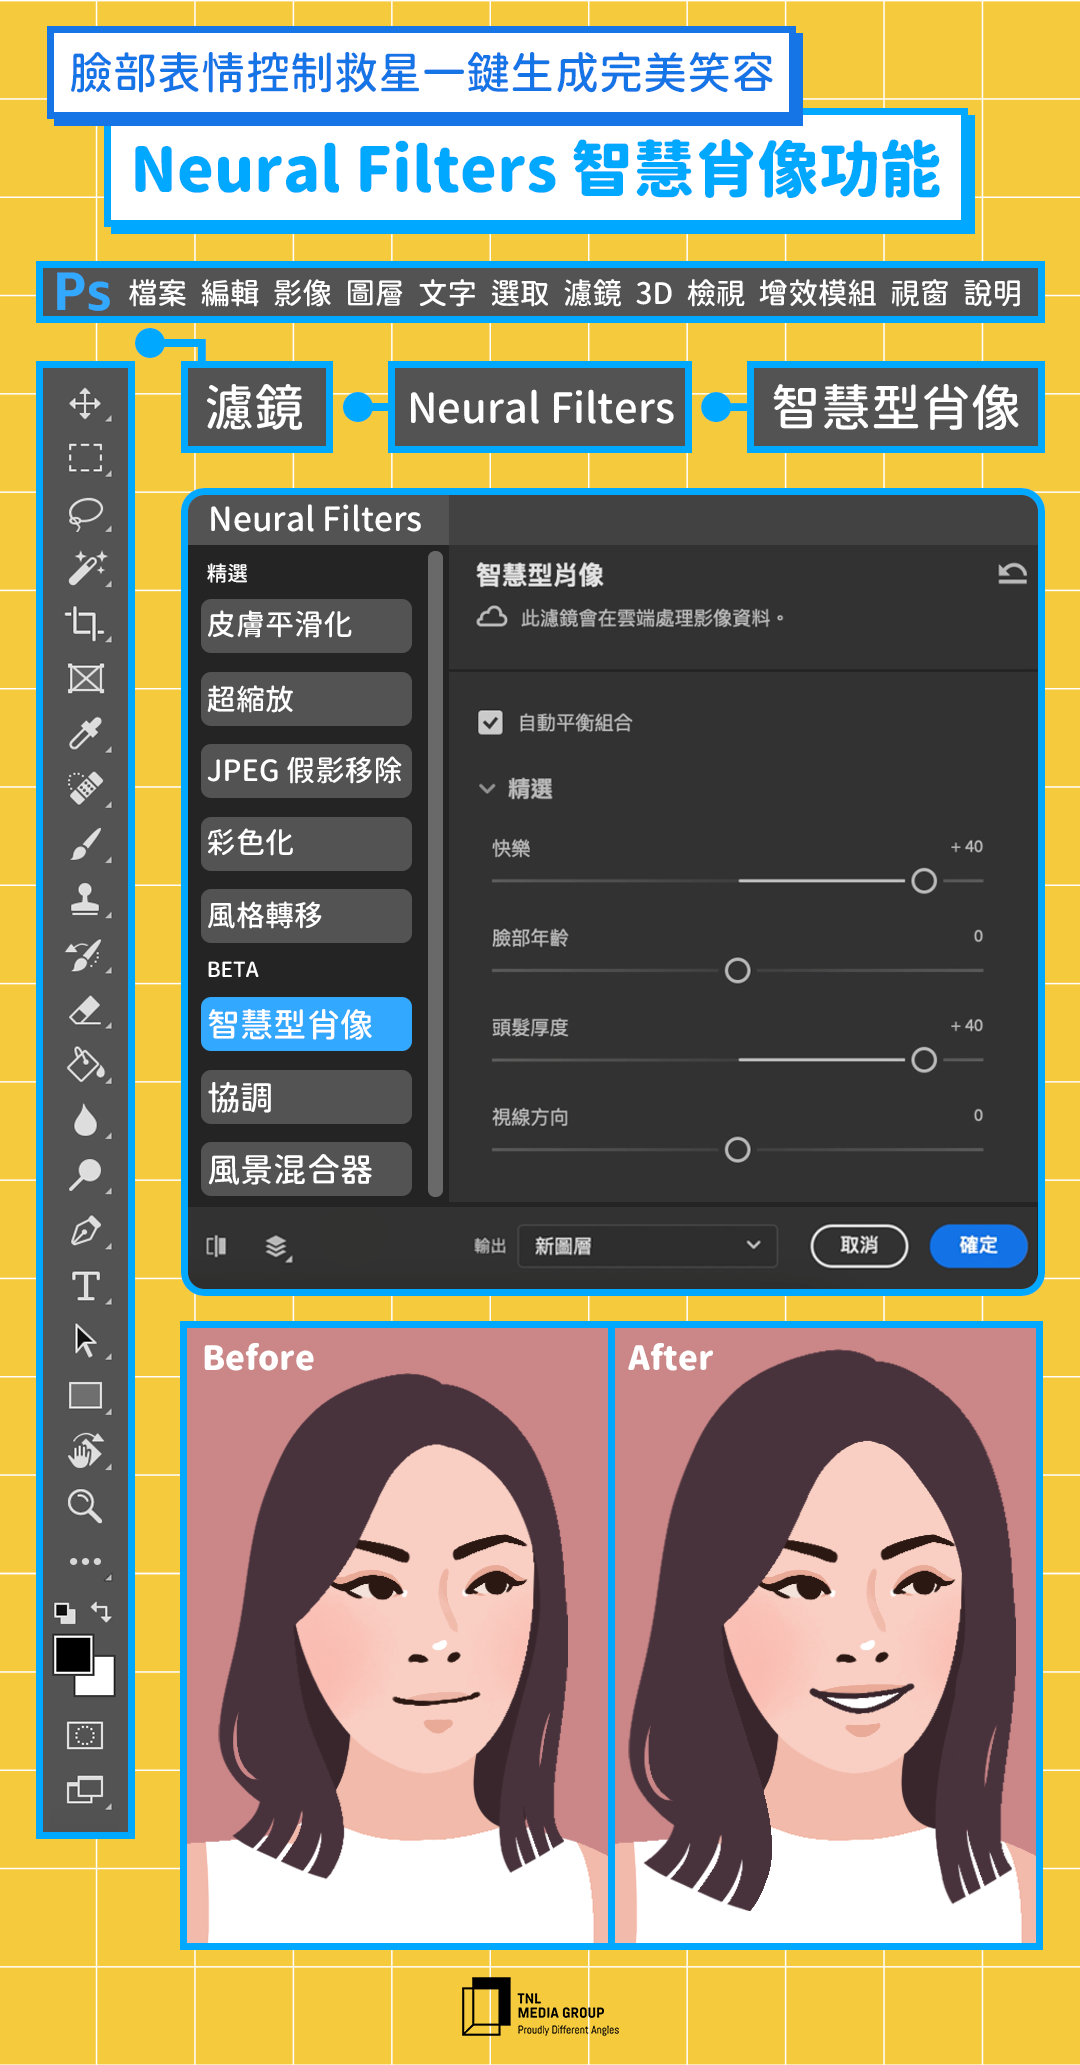 The photo mentions facial expression control savior to generate a perfect smile with one click, Neural Filters smart portrait function, Ps file editing image layer text selection filter 3D viewing plug-in module window description, including animation, poster, font, animation ,text